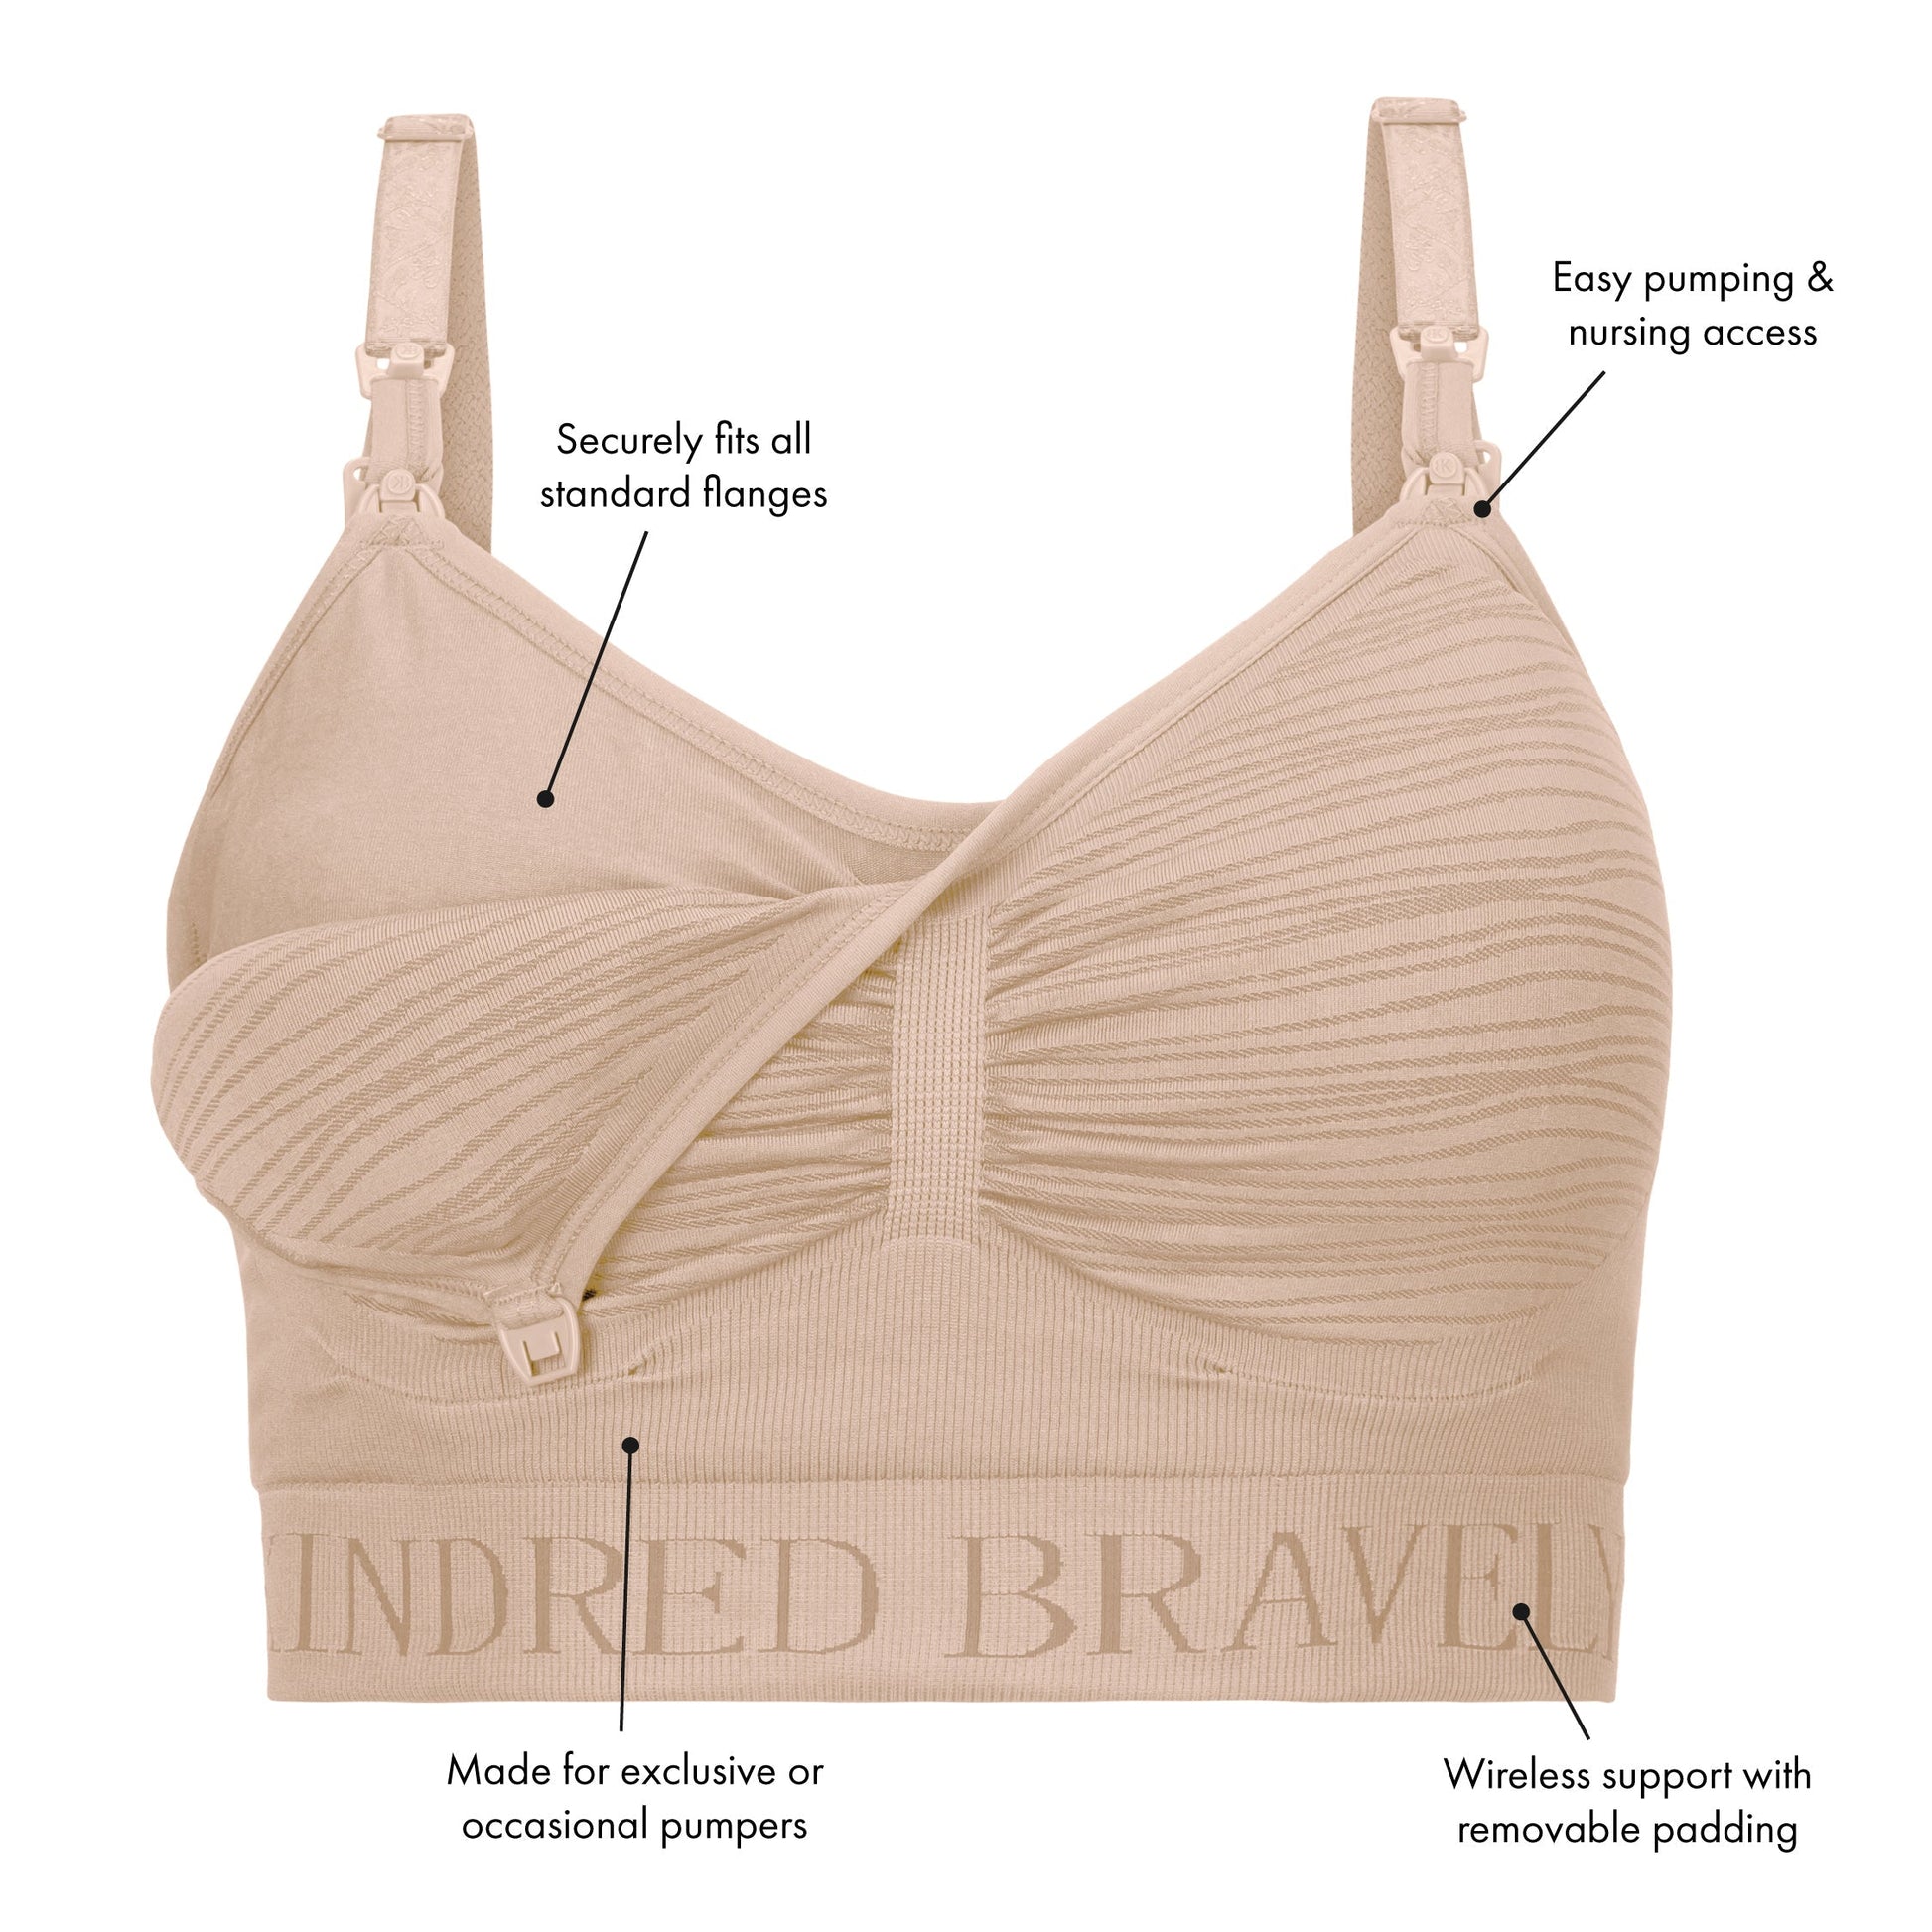 Our NEW Cadence bra REALLY brings the support! Plus it's super